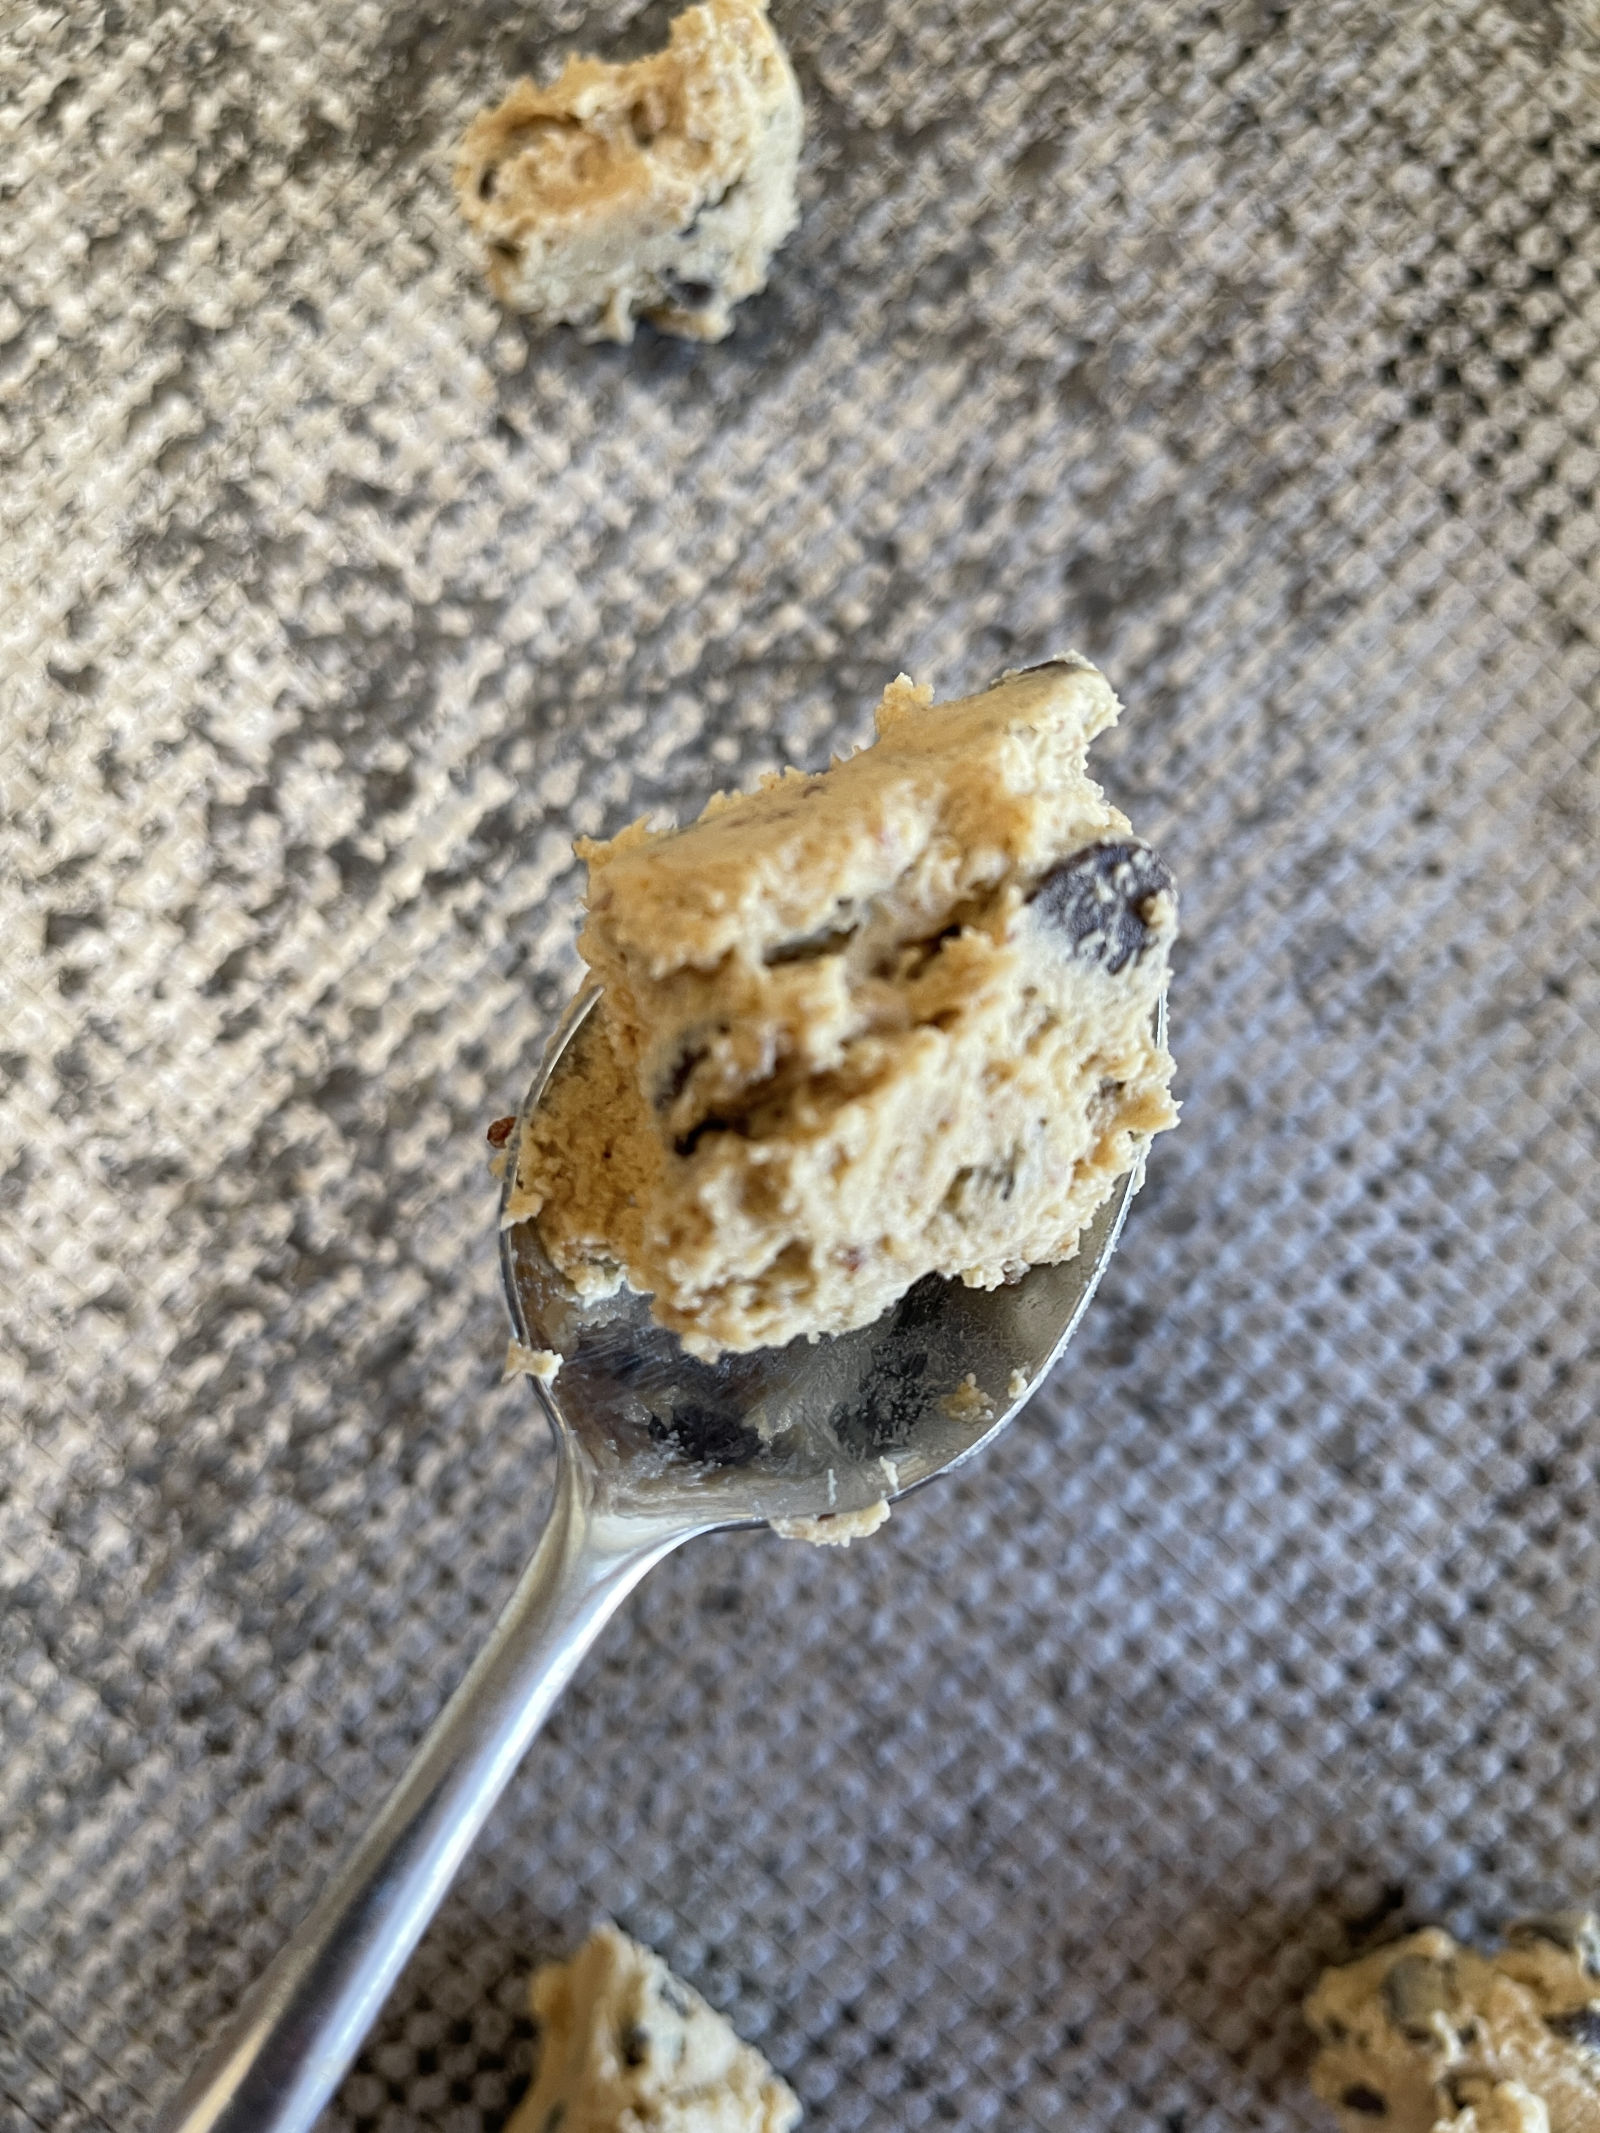 A spoonful of chocolate chip cookie dough with a sourdough discard flax egg. A cookie sheet in the background has spoonfuls of cookie dough sitting on it.